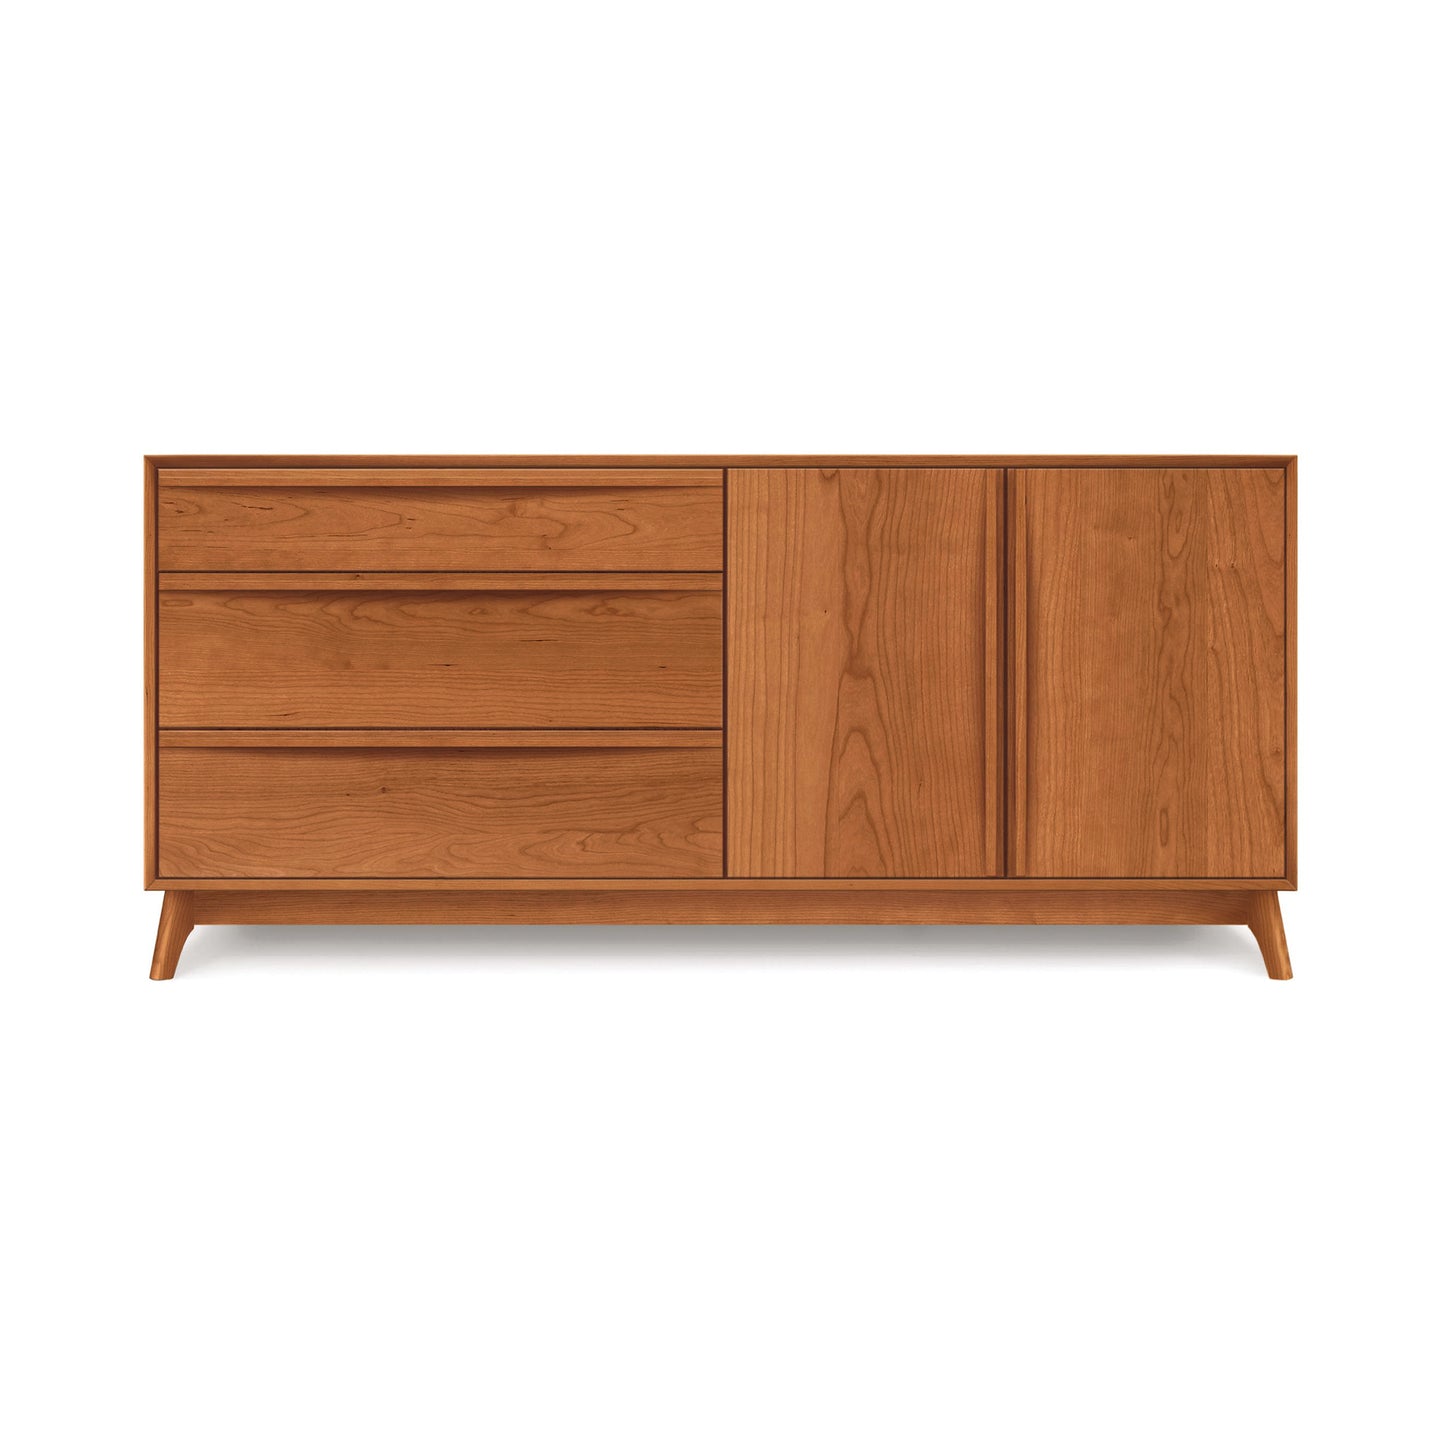 A Catalina 3-Drawers, 2-Door Buffet by Copeland Furniture with drawers on the left and a cabinet section on the right, standing on angled legs with a light background.